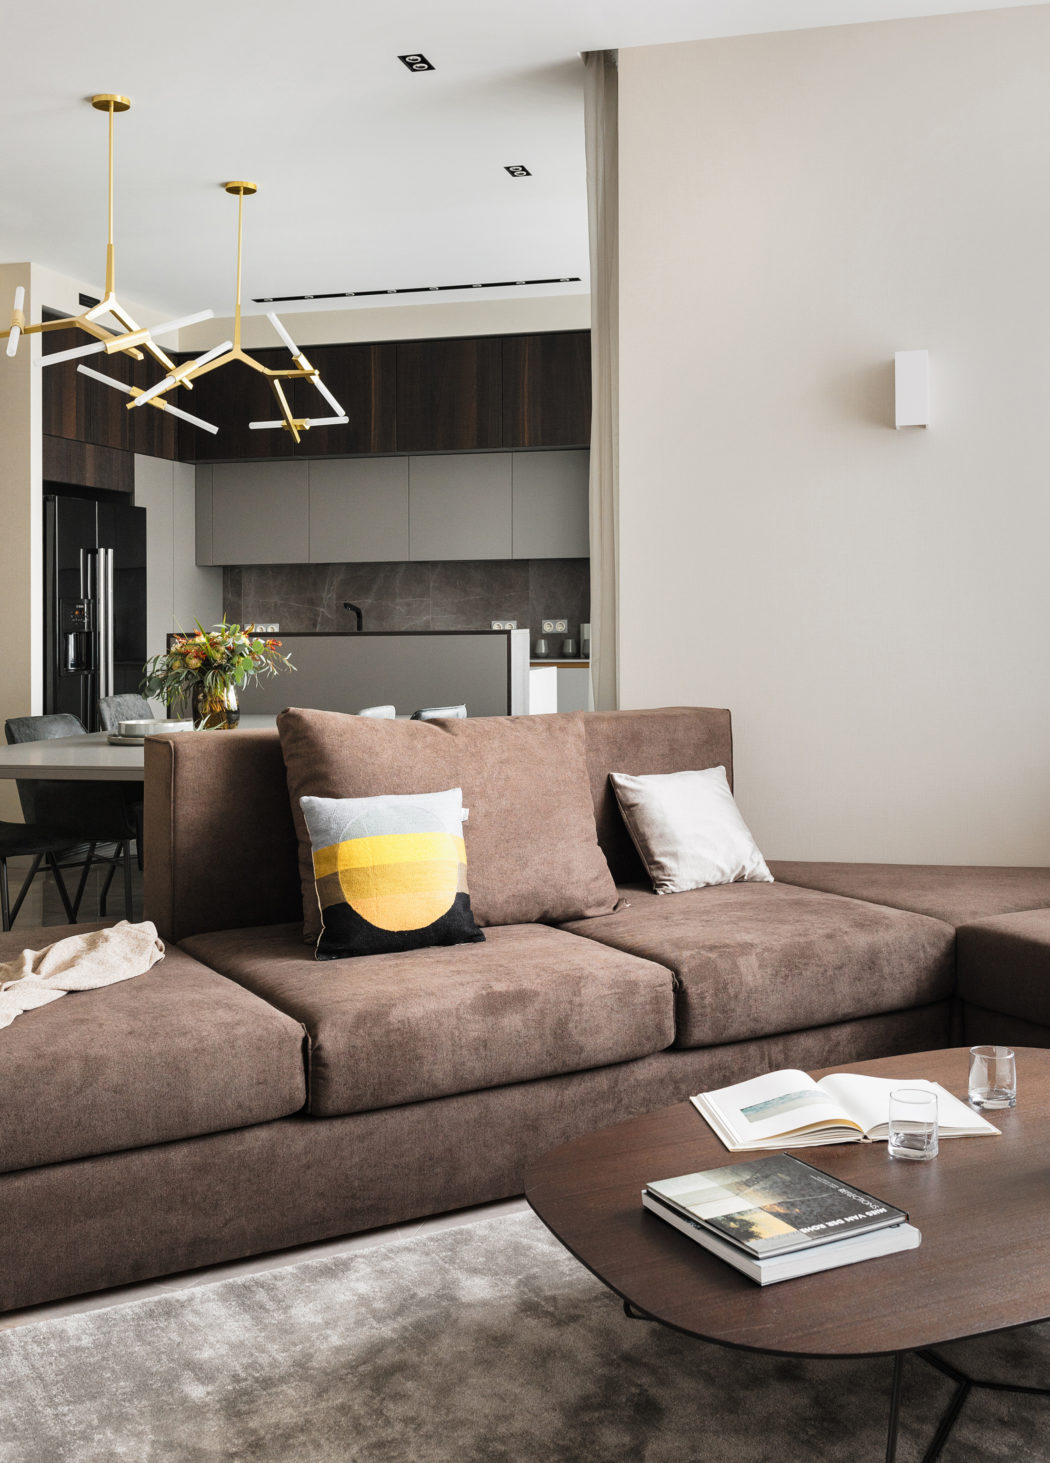 Contemporary living room with brown sectional sofa and geometric light fixture.